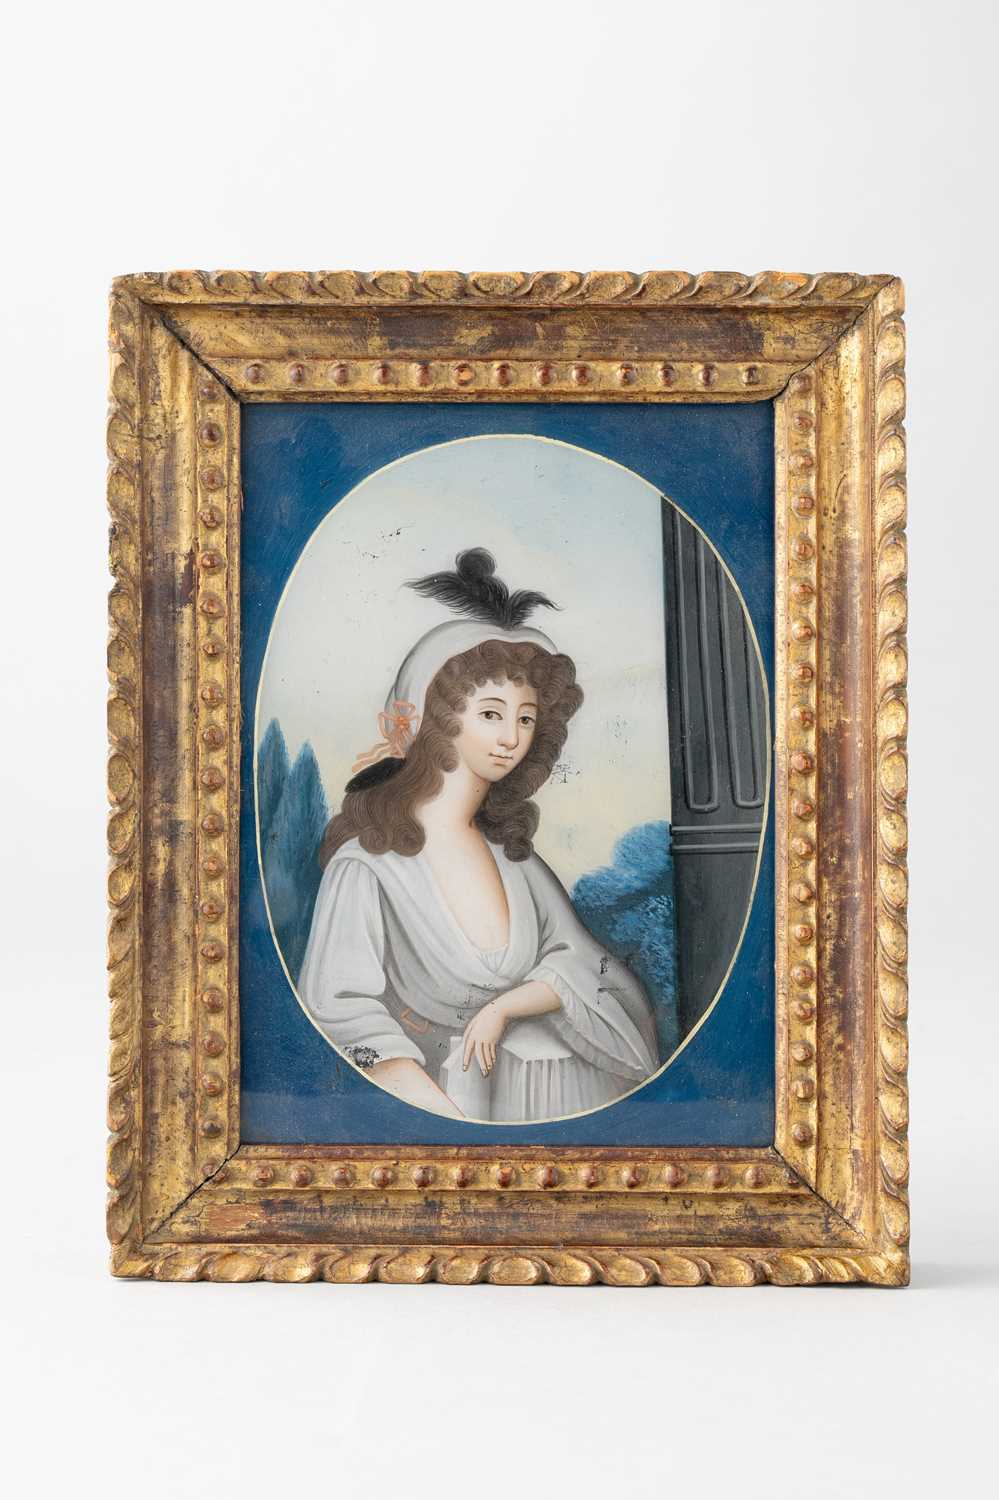 NO RESERVE A CHINESE 'EUROPEAN SUBJECT' REVERSE GLASS PAINTING C.1800 Depicting a half-length